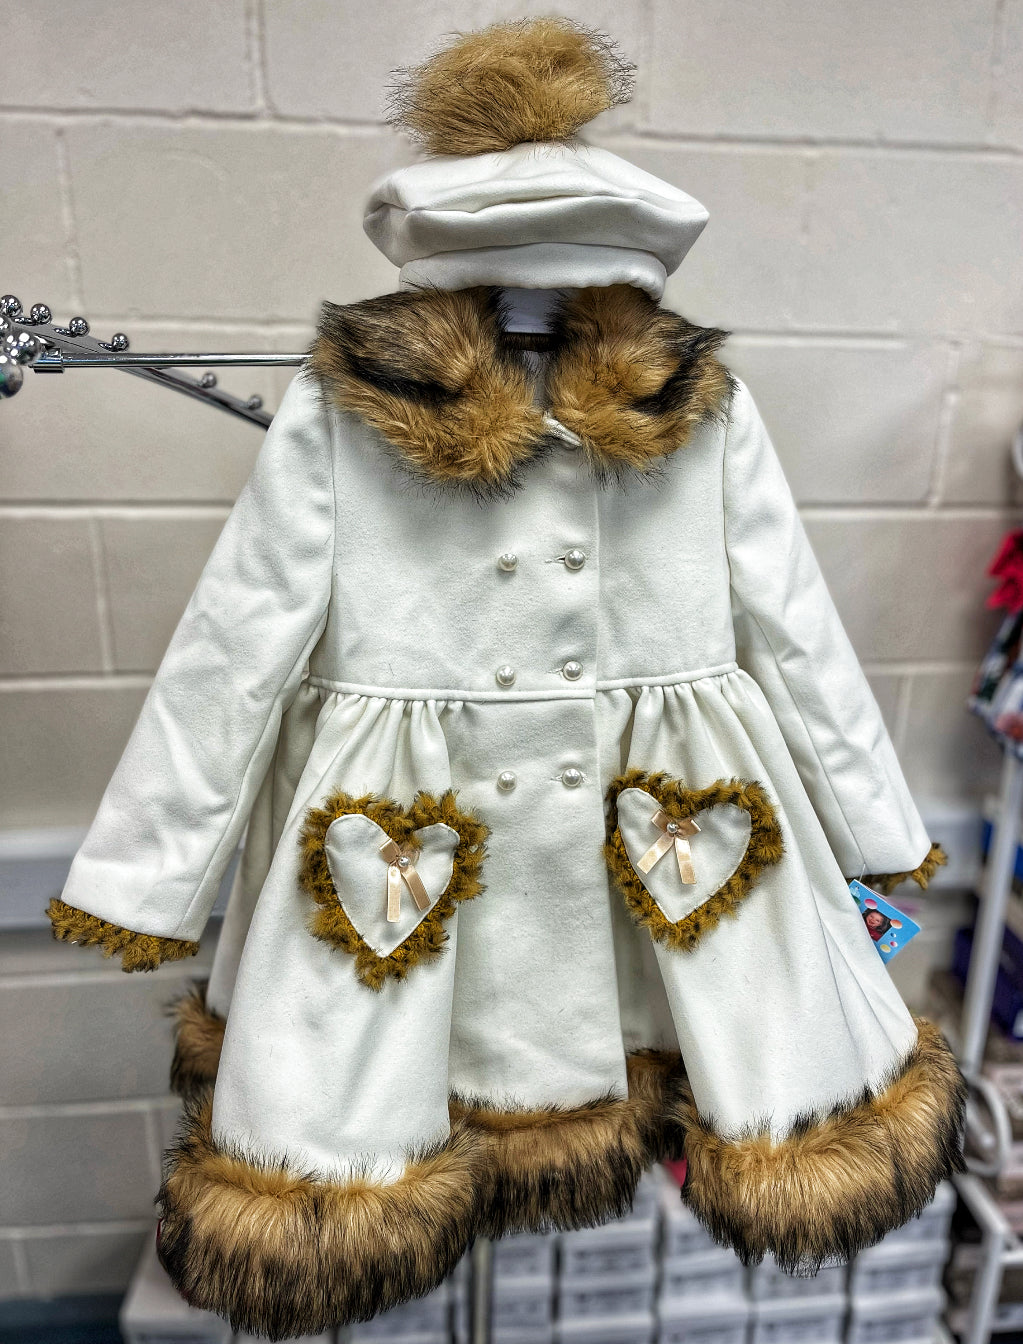 Sonata coat and hat in stock age 5